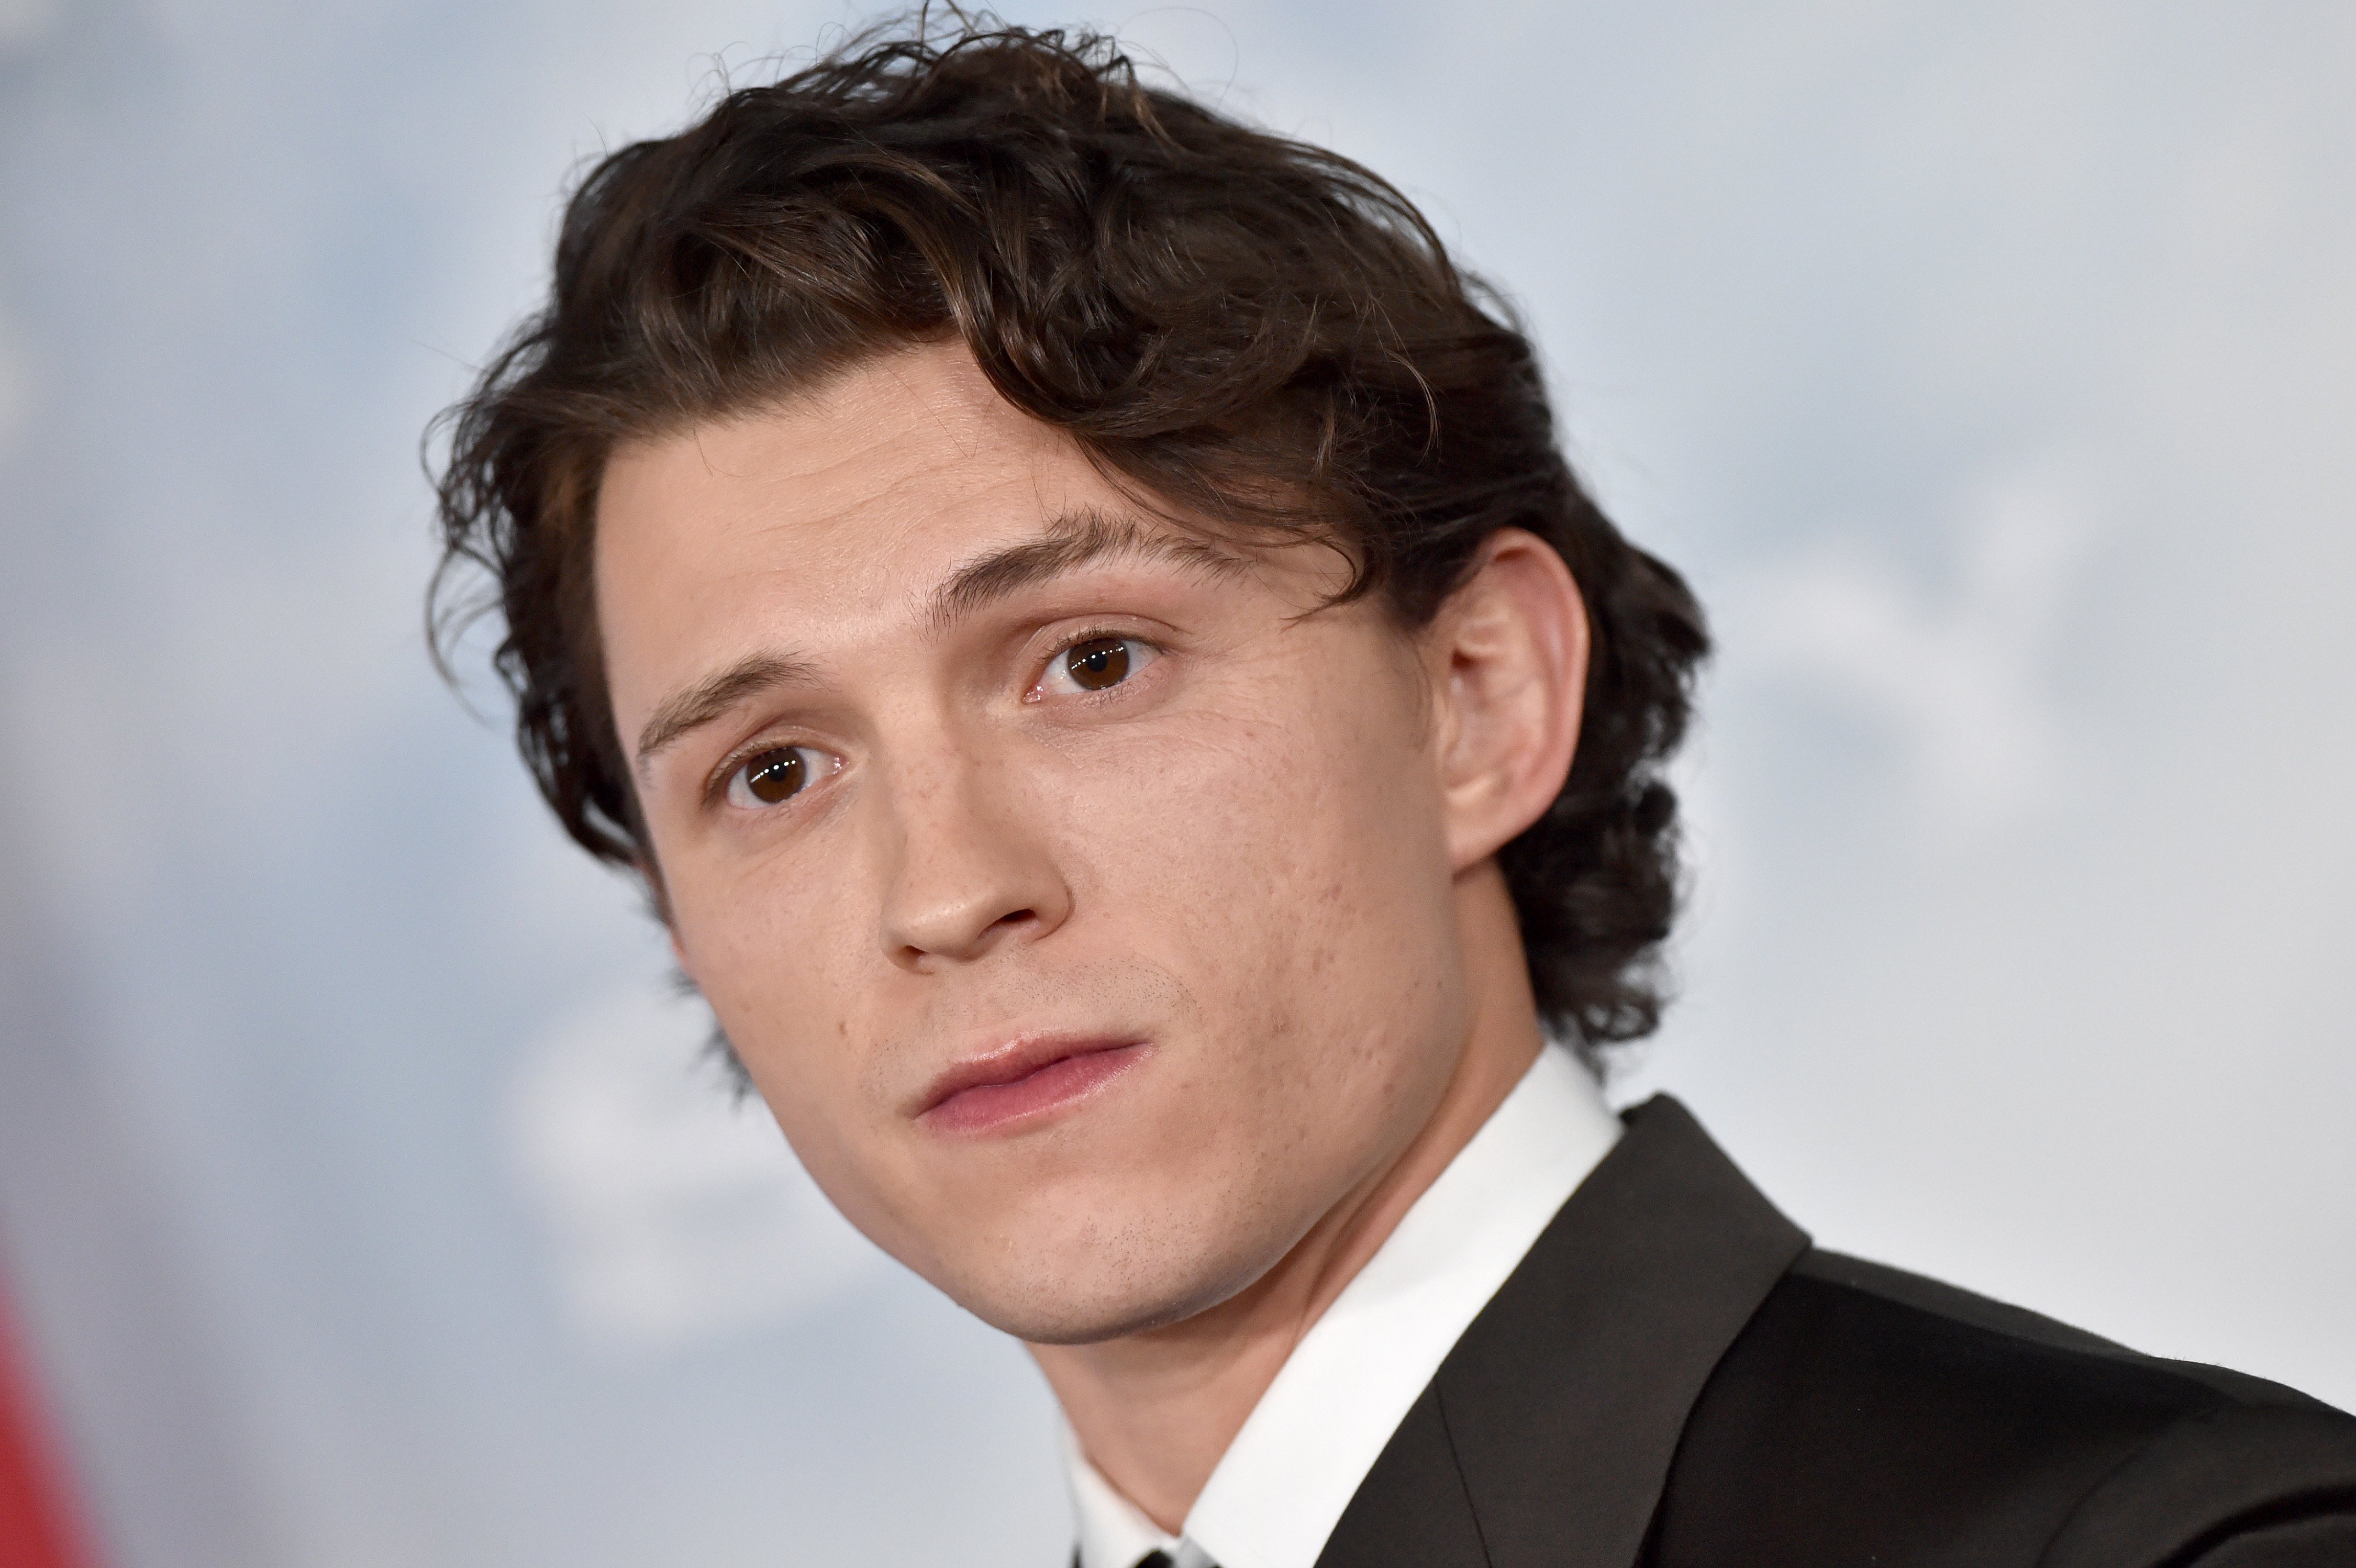 'Spider-Man: No Way Home' star Tom Holland, who wants his character to fight Morbius, wears a dark gray suit over a white button-up shirt and black tie.